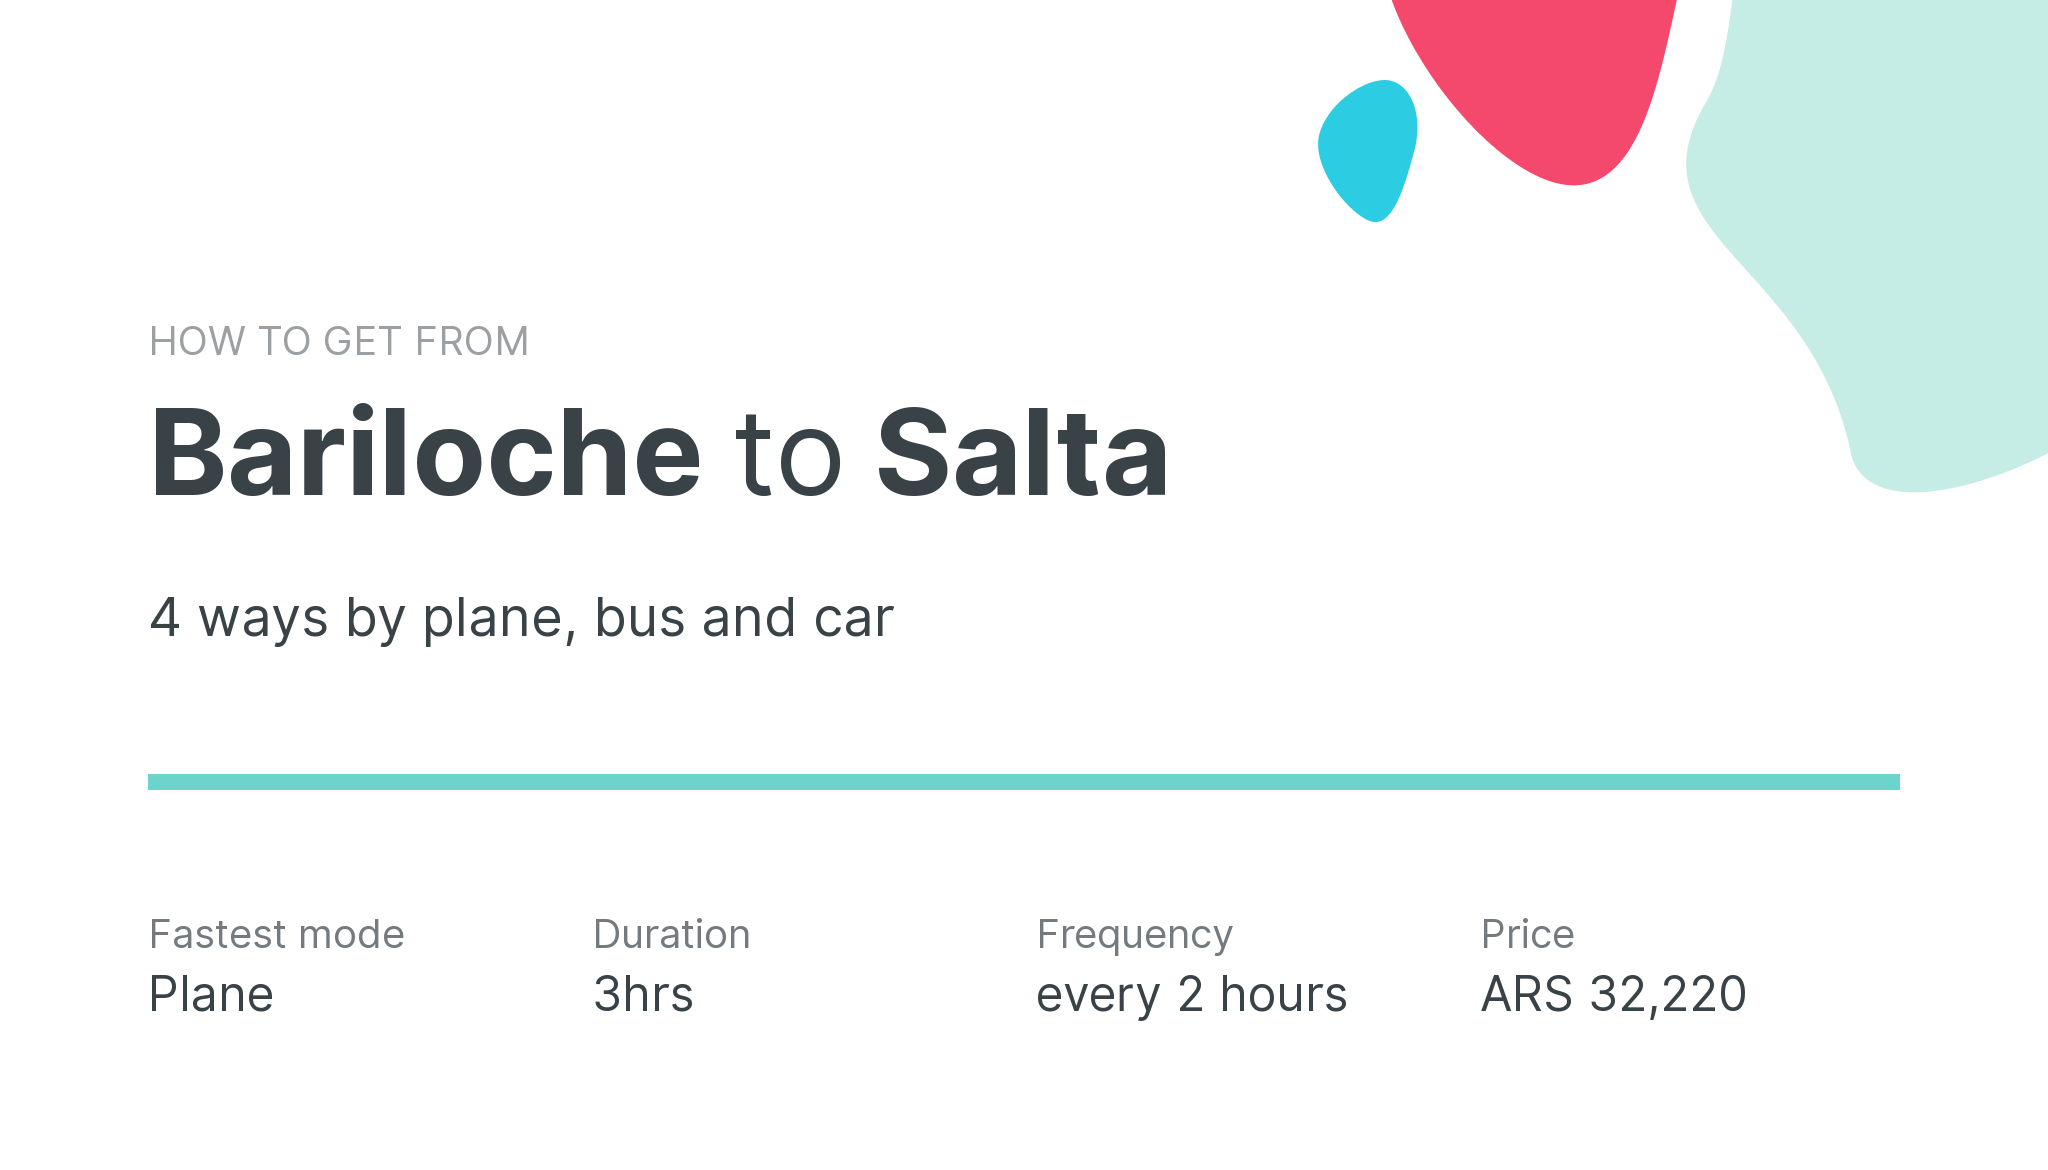 How do I get from Bariloche to Salta